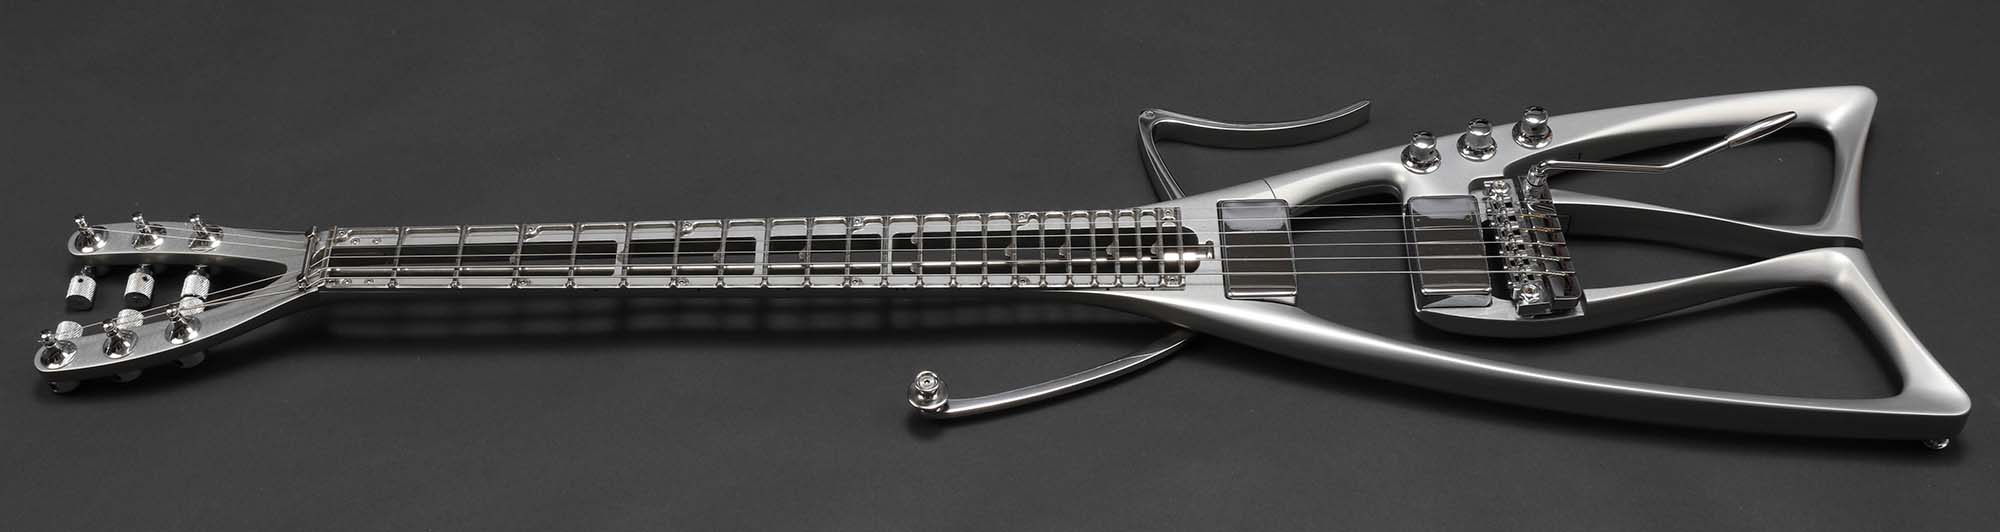 UPD-G21 Electric guitar